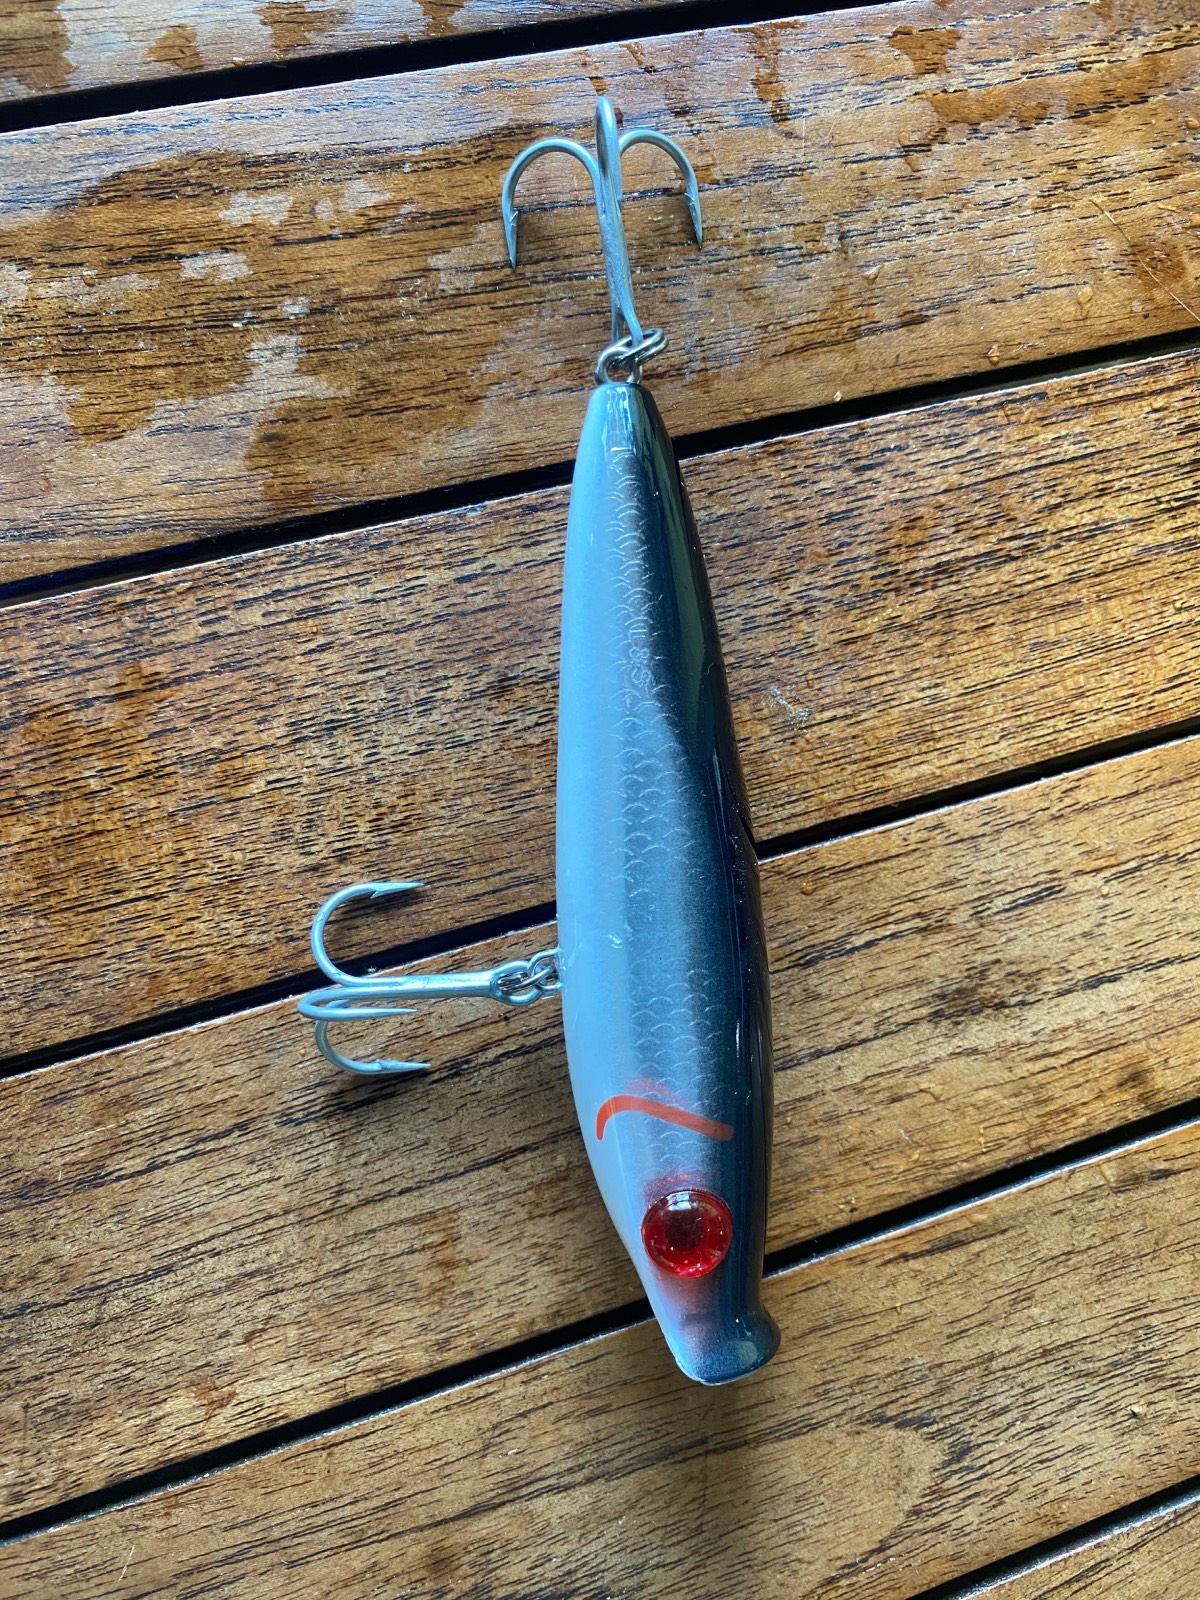 Picking The Best Speckled Trout Lures